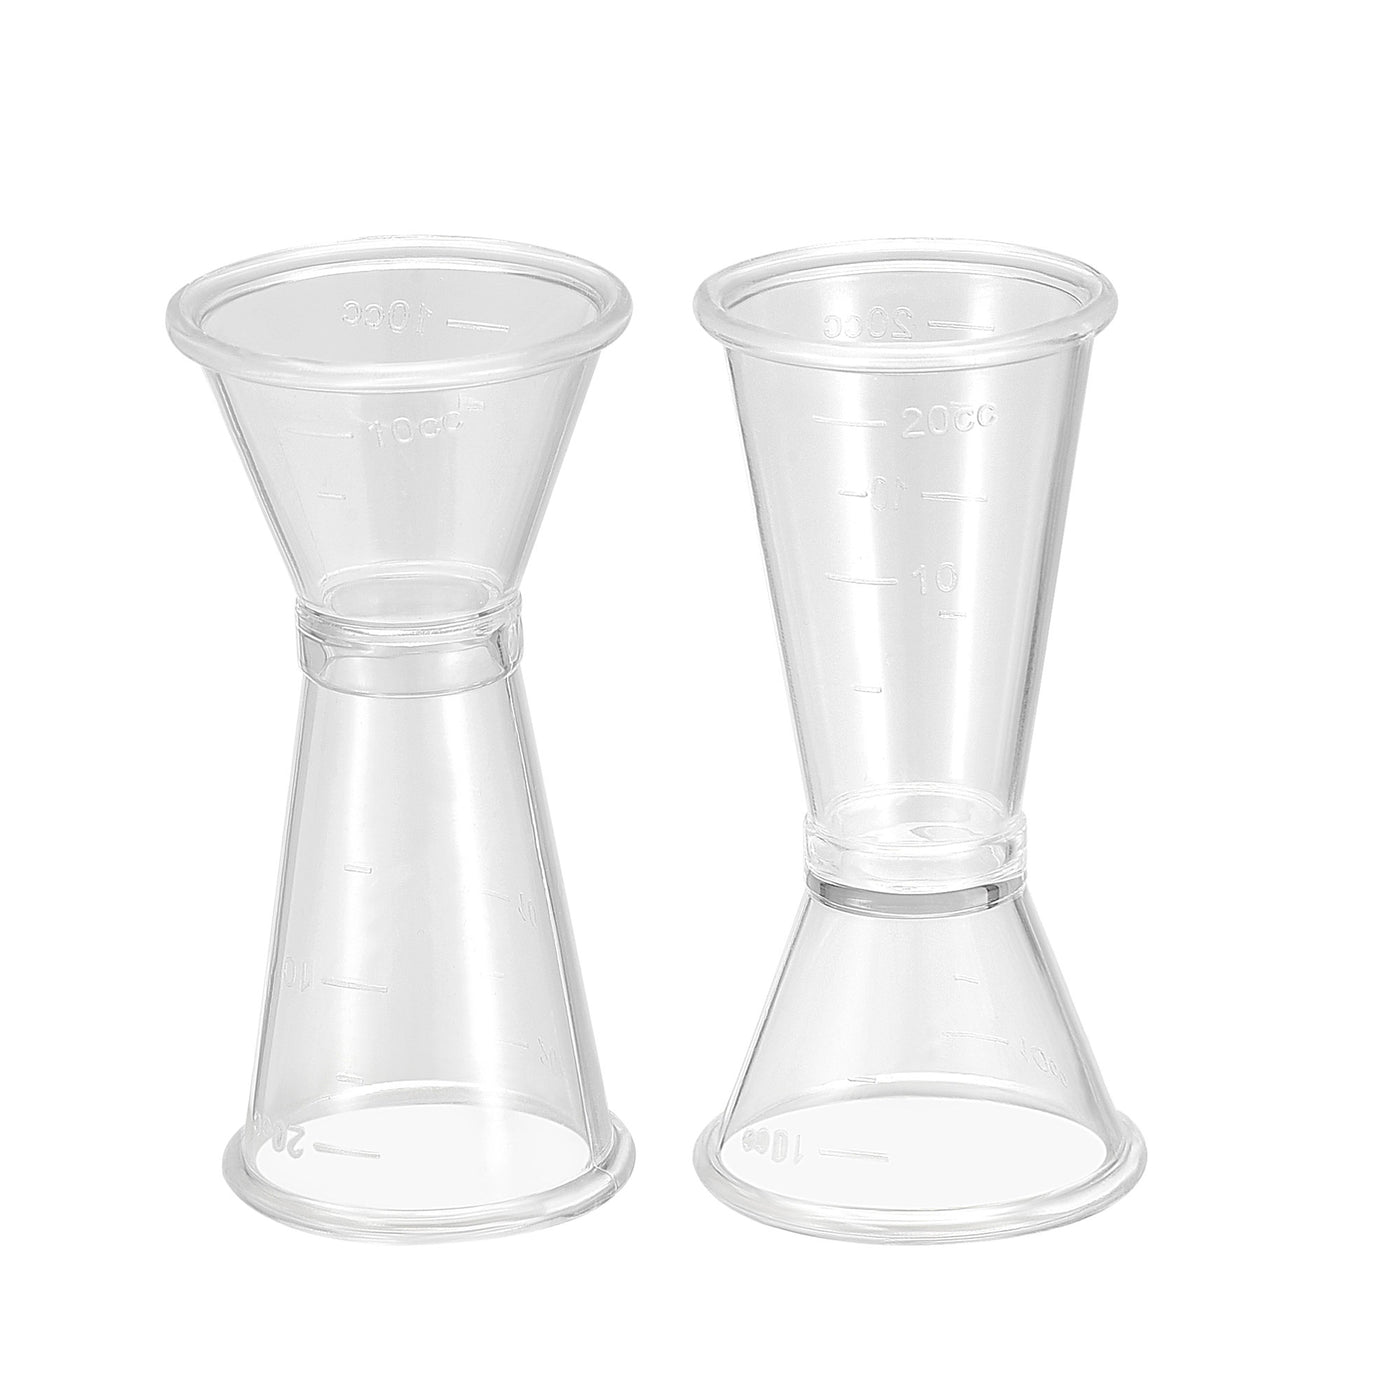 uxcell Uxcell Measuring Cup 20ml/10ml PC Plastic Double Head Beaker Clear 3Pcs